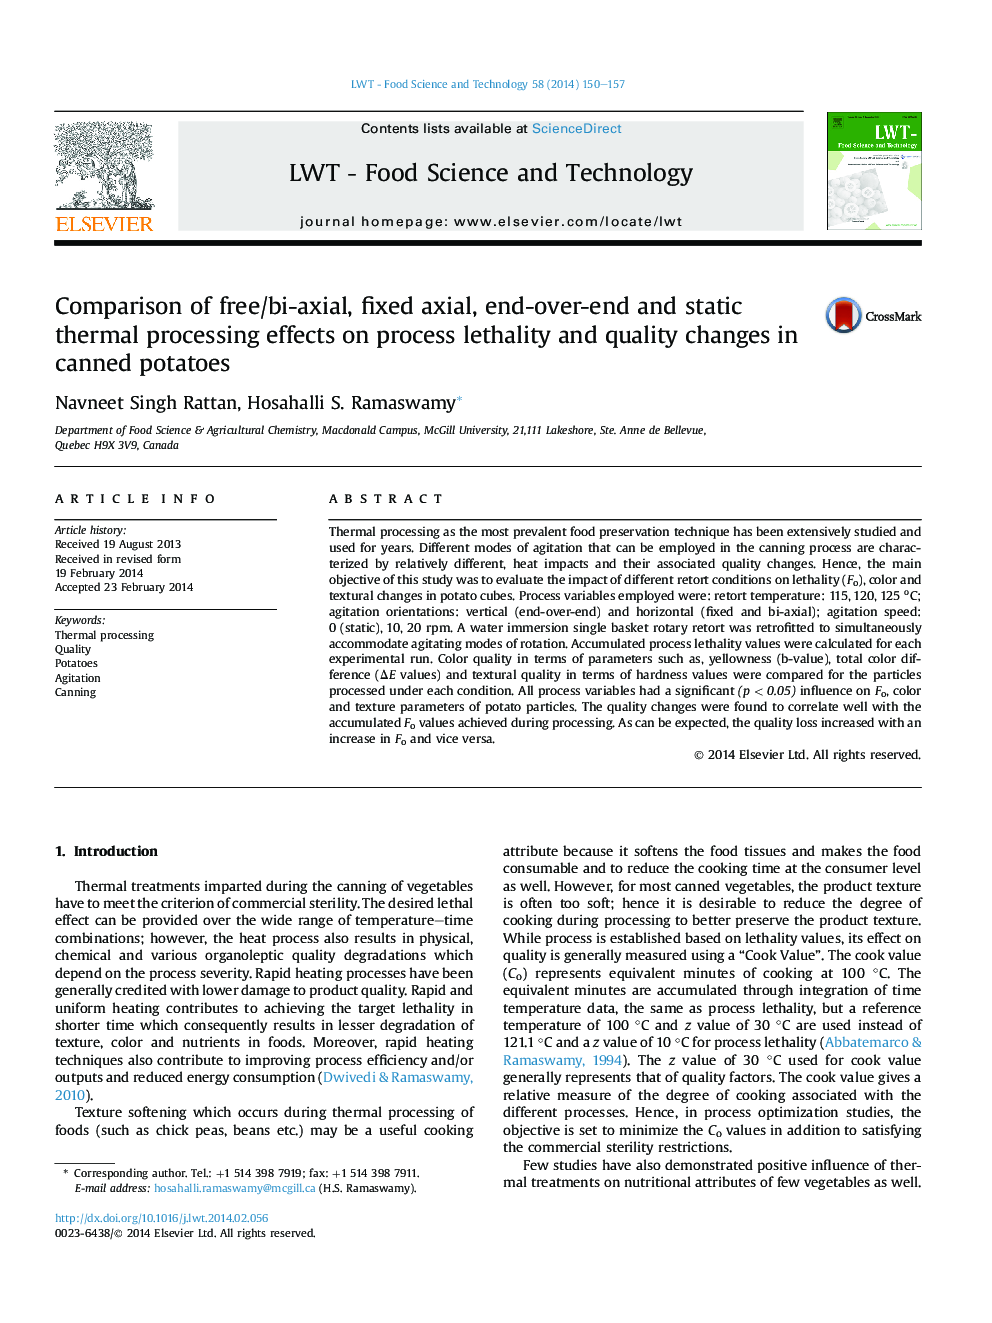 Comparison of free/bi-axial, fixed axial, end-over-end and static thermal processing effects on process lethality and quality changes in canned potatoes